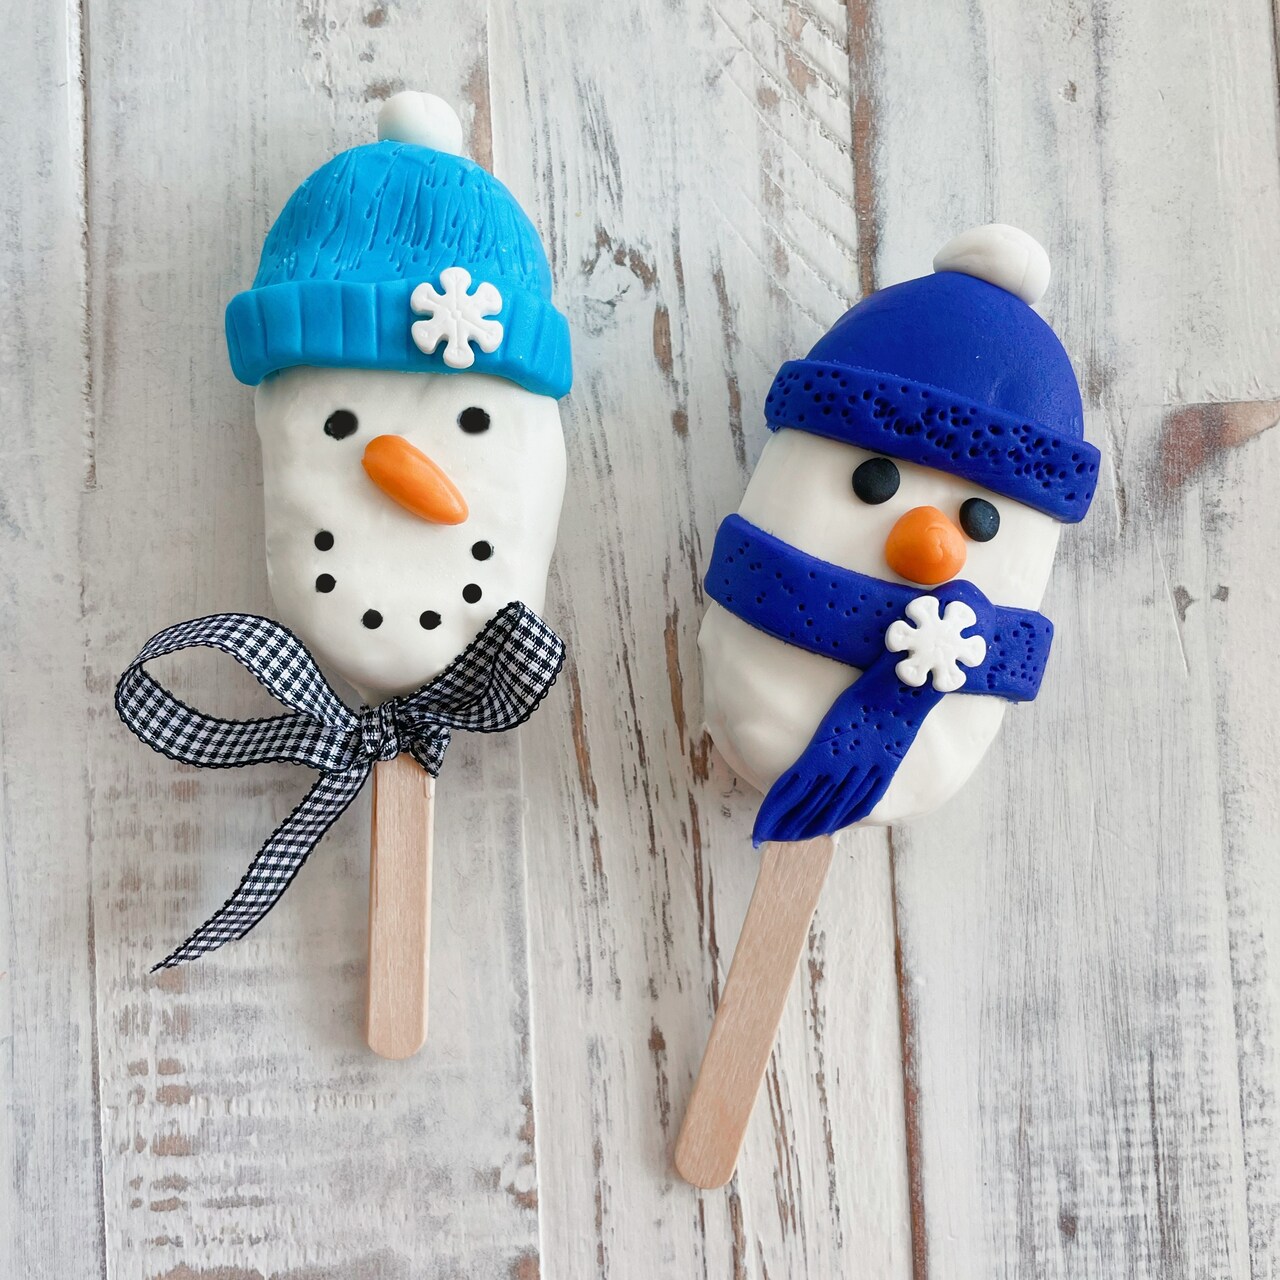 Snowman Cakesicles with @wildbakes